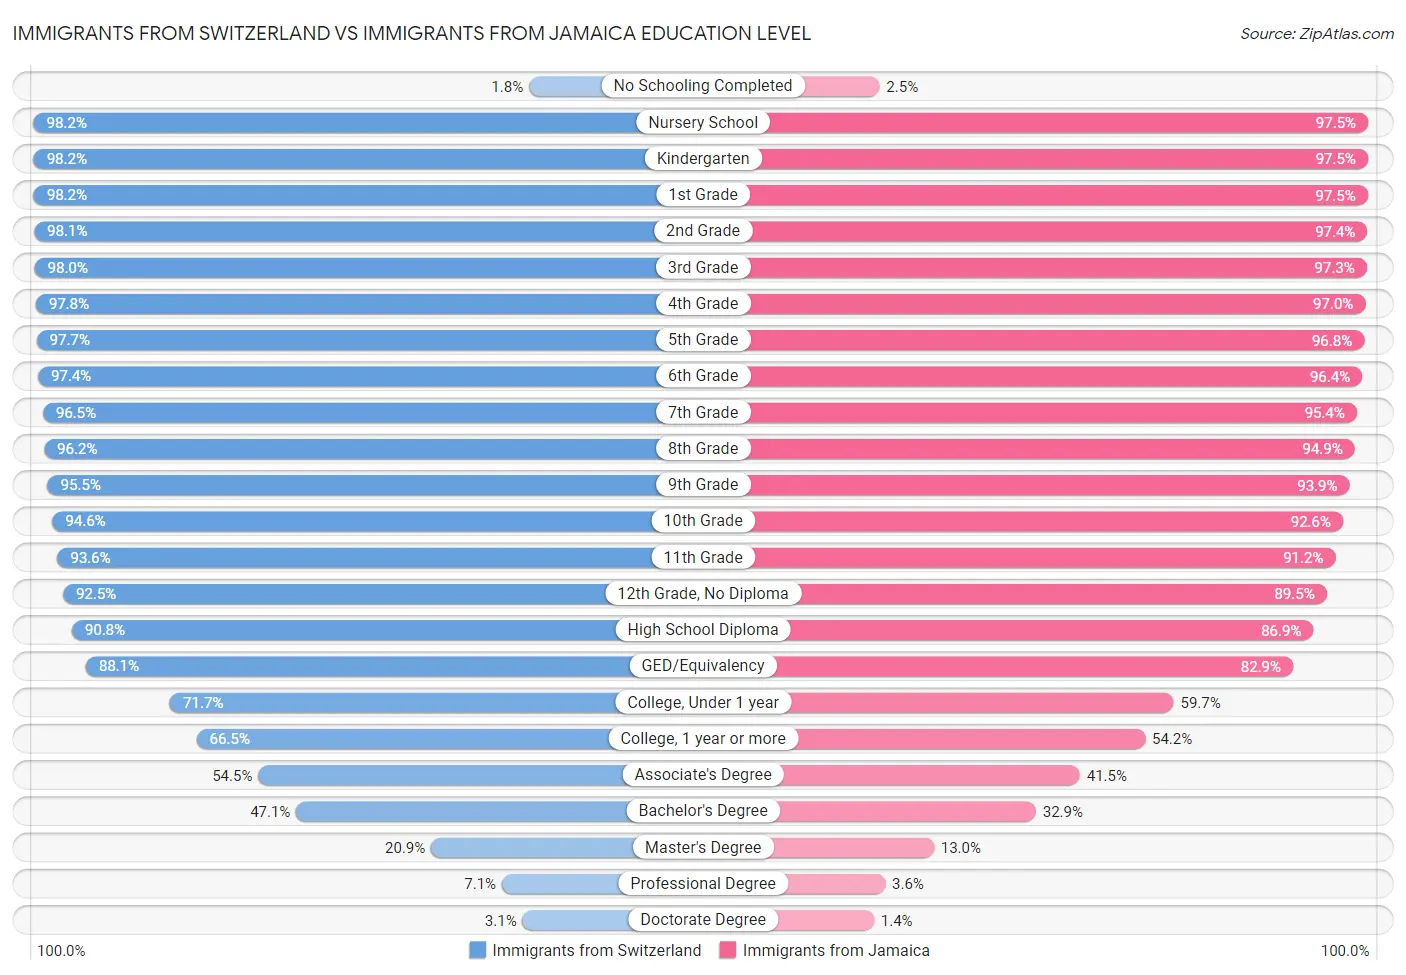 Immigrants from Switzerland vs Immigrants from Jamaica Education Level